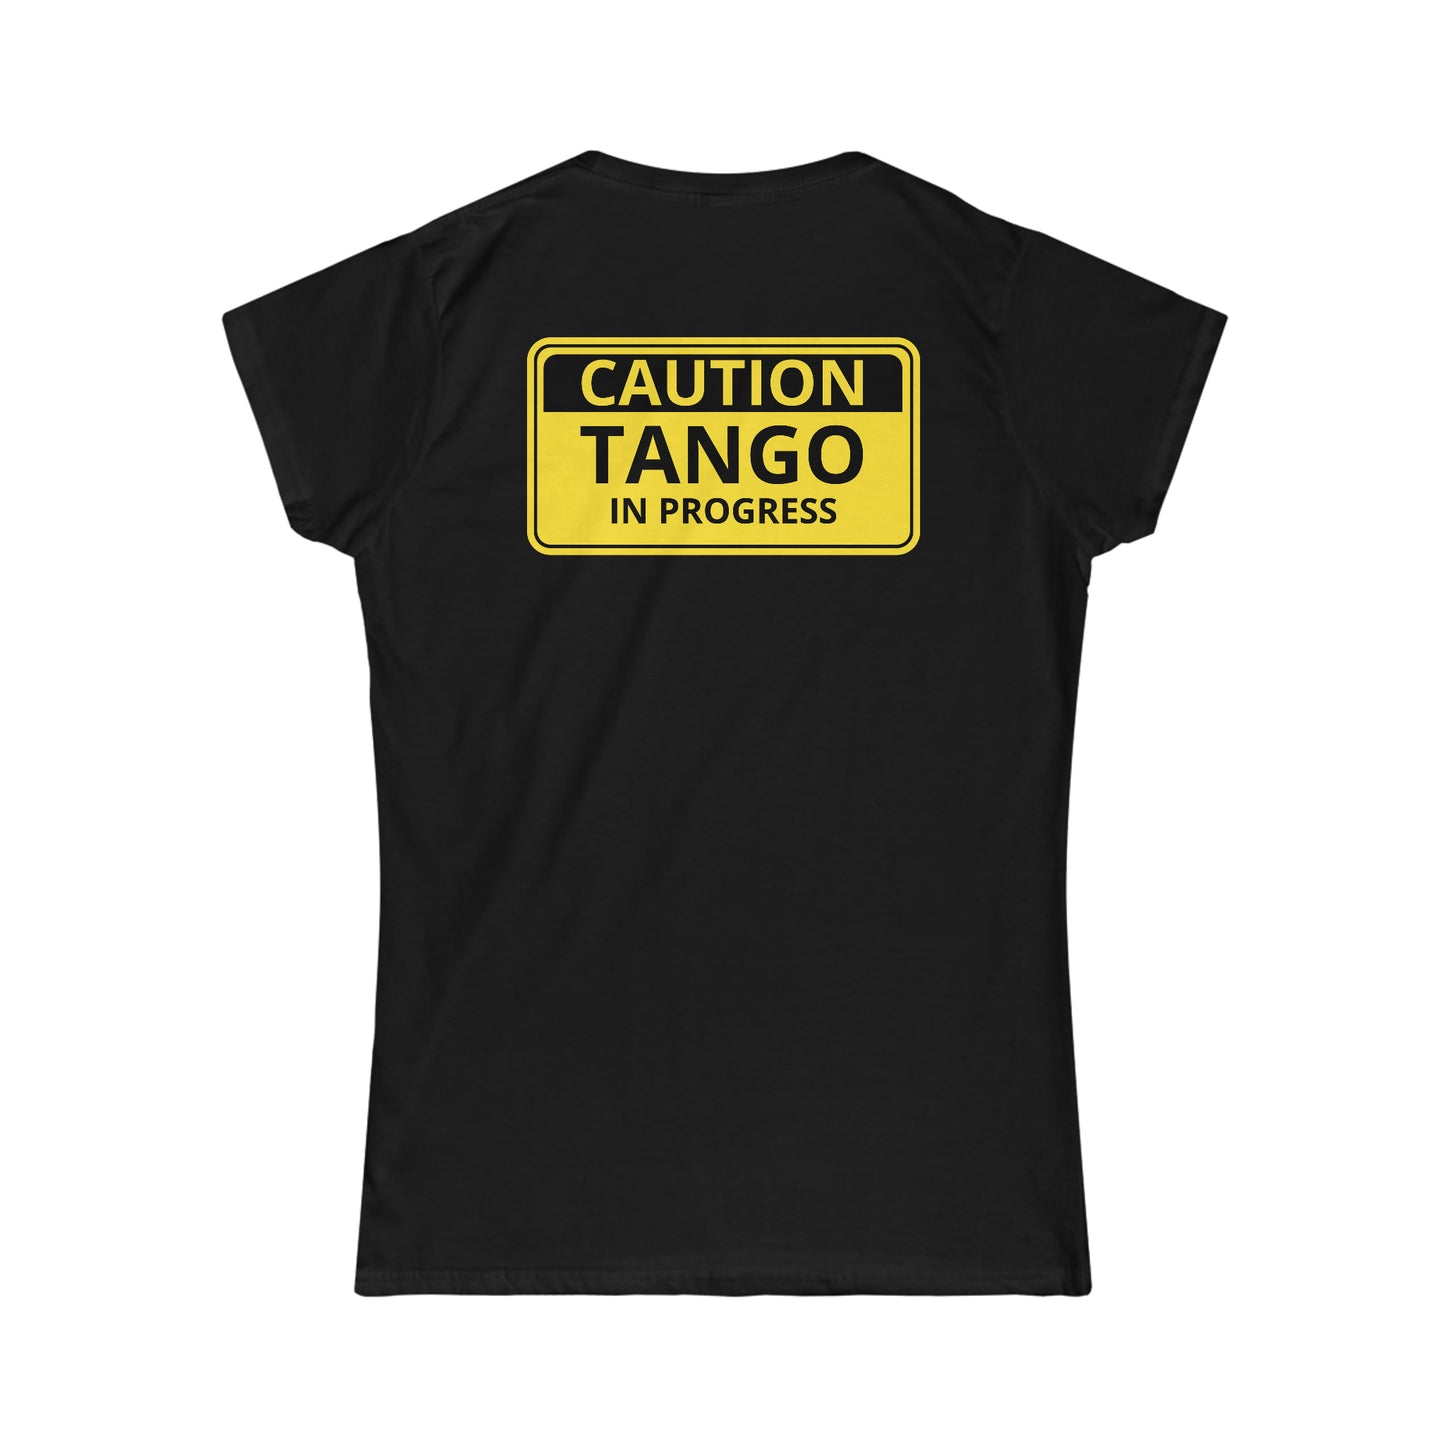 An argentine tango dance tshirt with the text "Caution Tango in progress" written on a yellow warning sign. A funny tshirt for tango dancers!